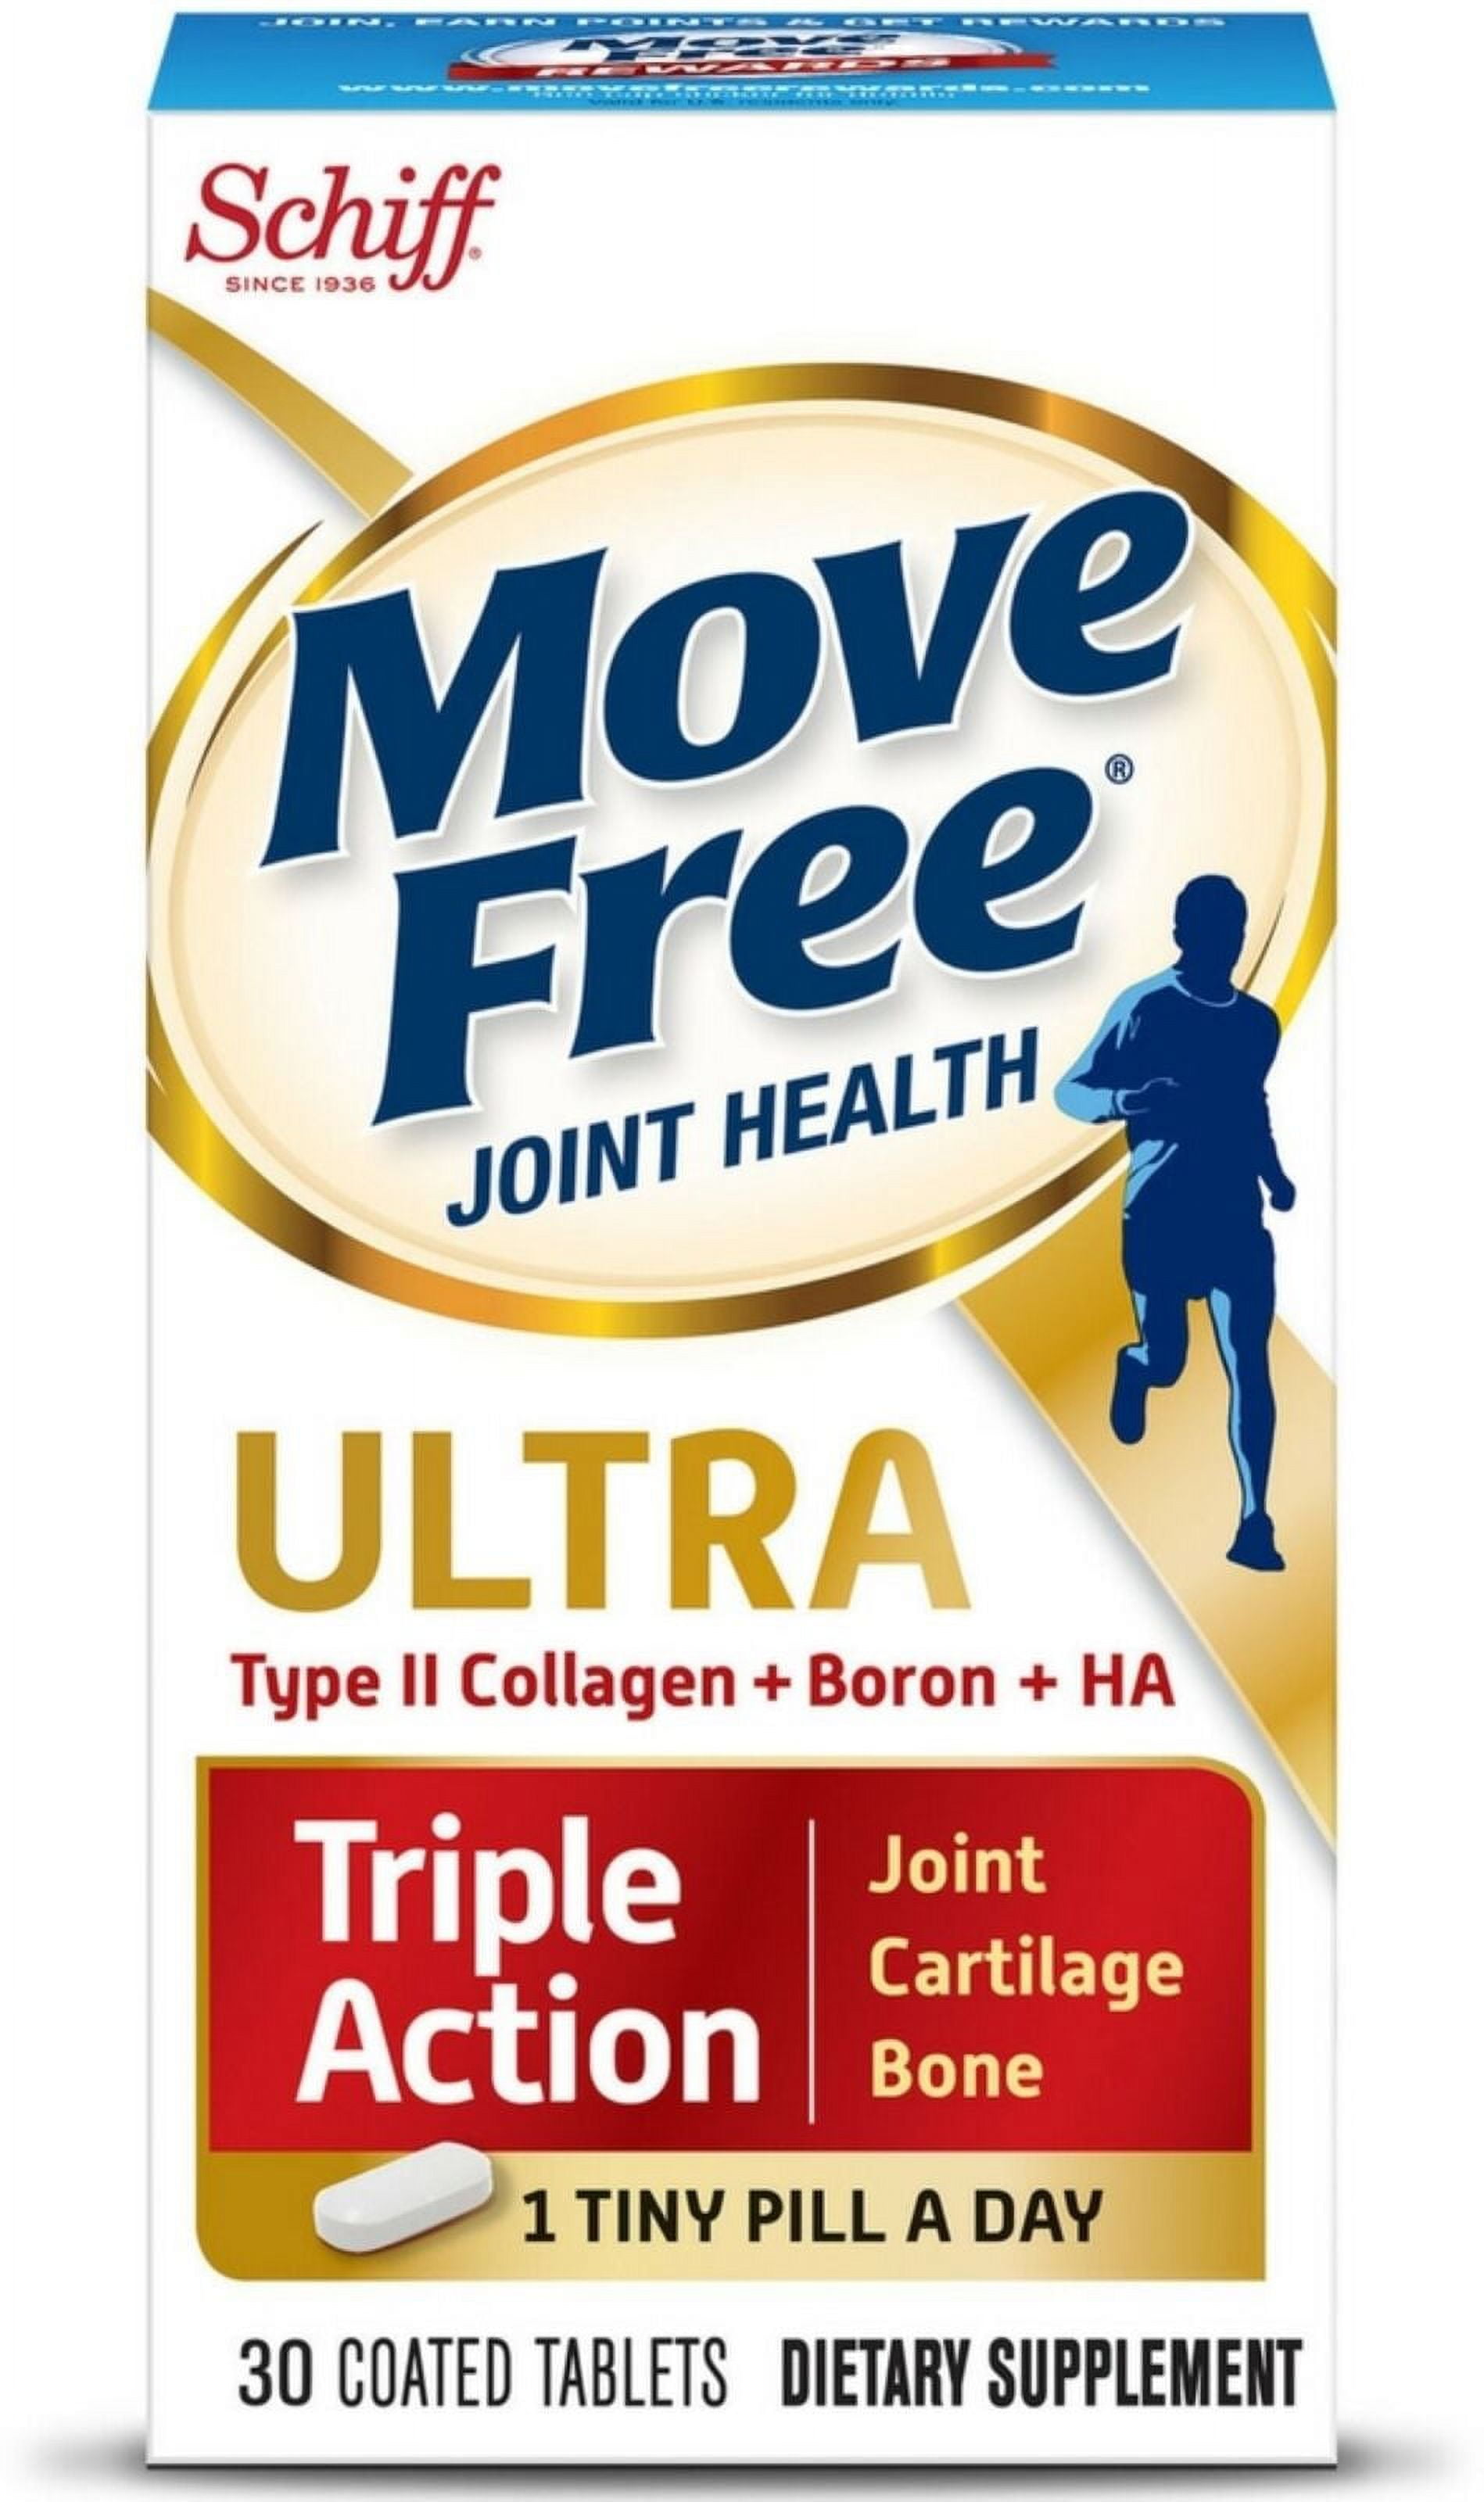 Move Free Ultra Type II Collagen + Boron + HA, Coated Tablets - 37 tablets